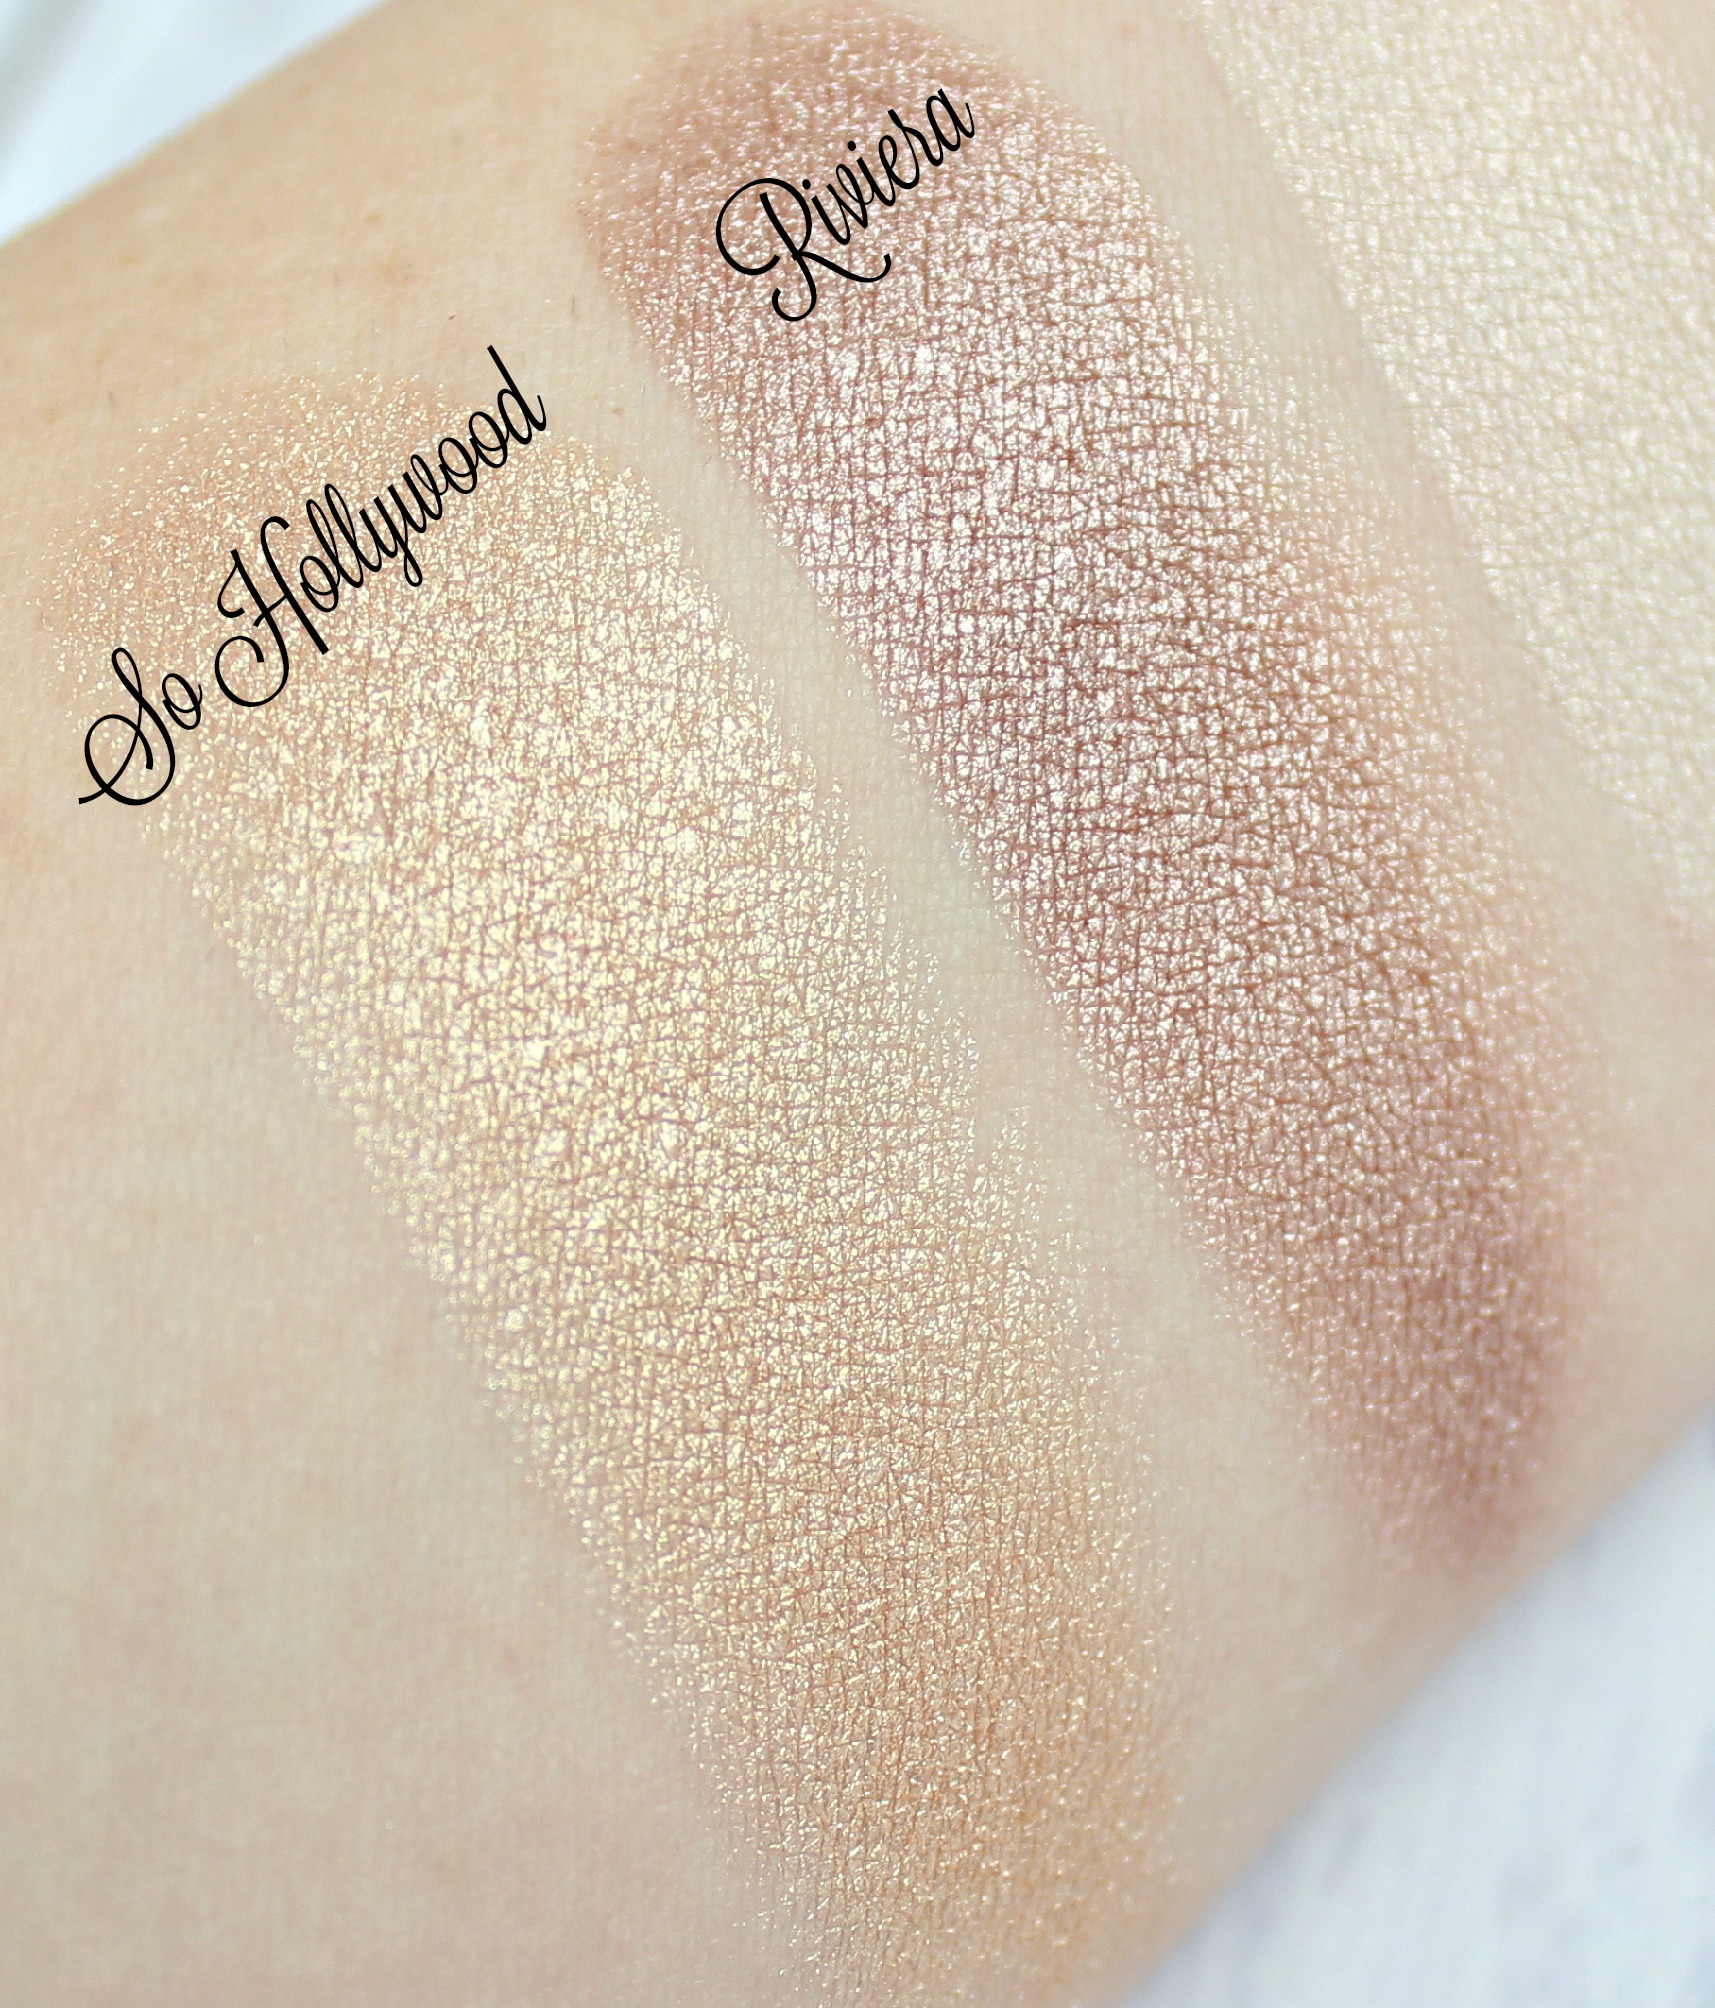 Hills Illuminators | Swatches Review (All 4 Shades!) - Love Lacquer